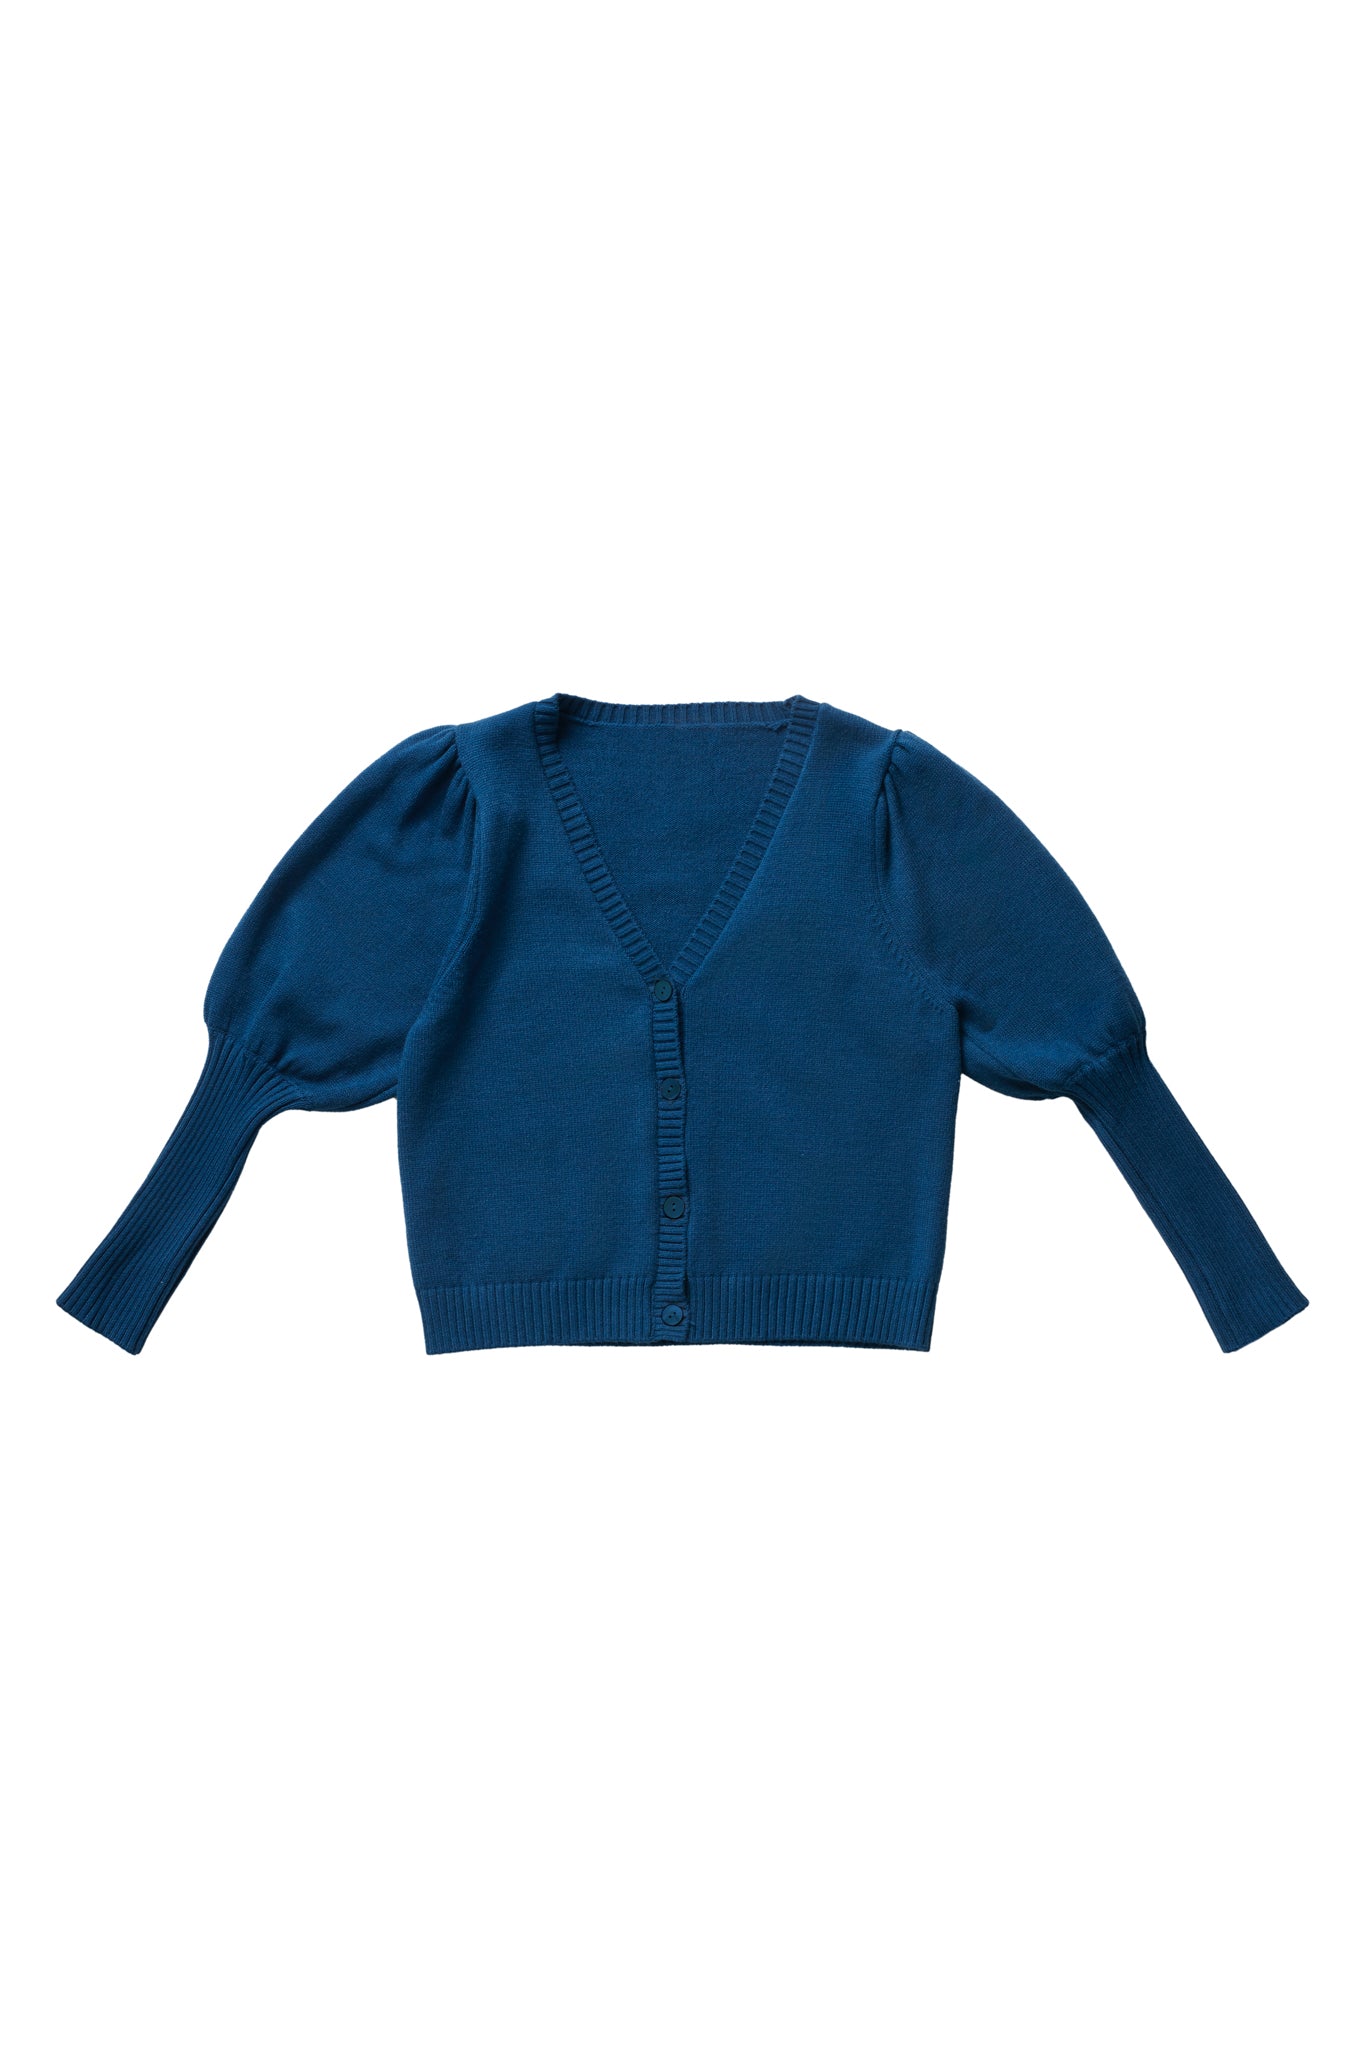 Puff Sleeves V Neck Cardigan in Teal #8138ZK